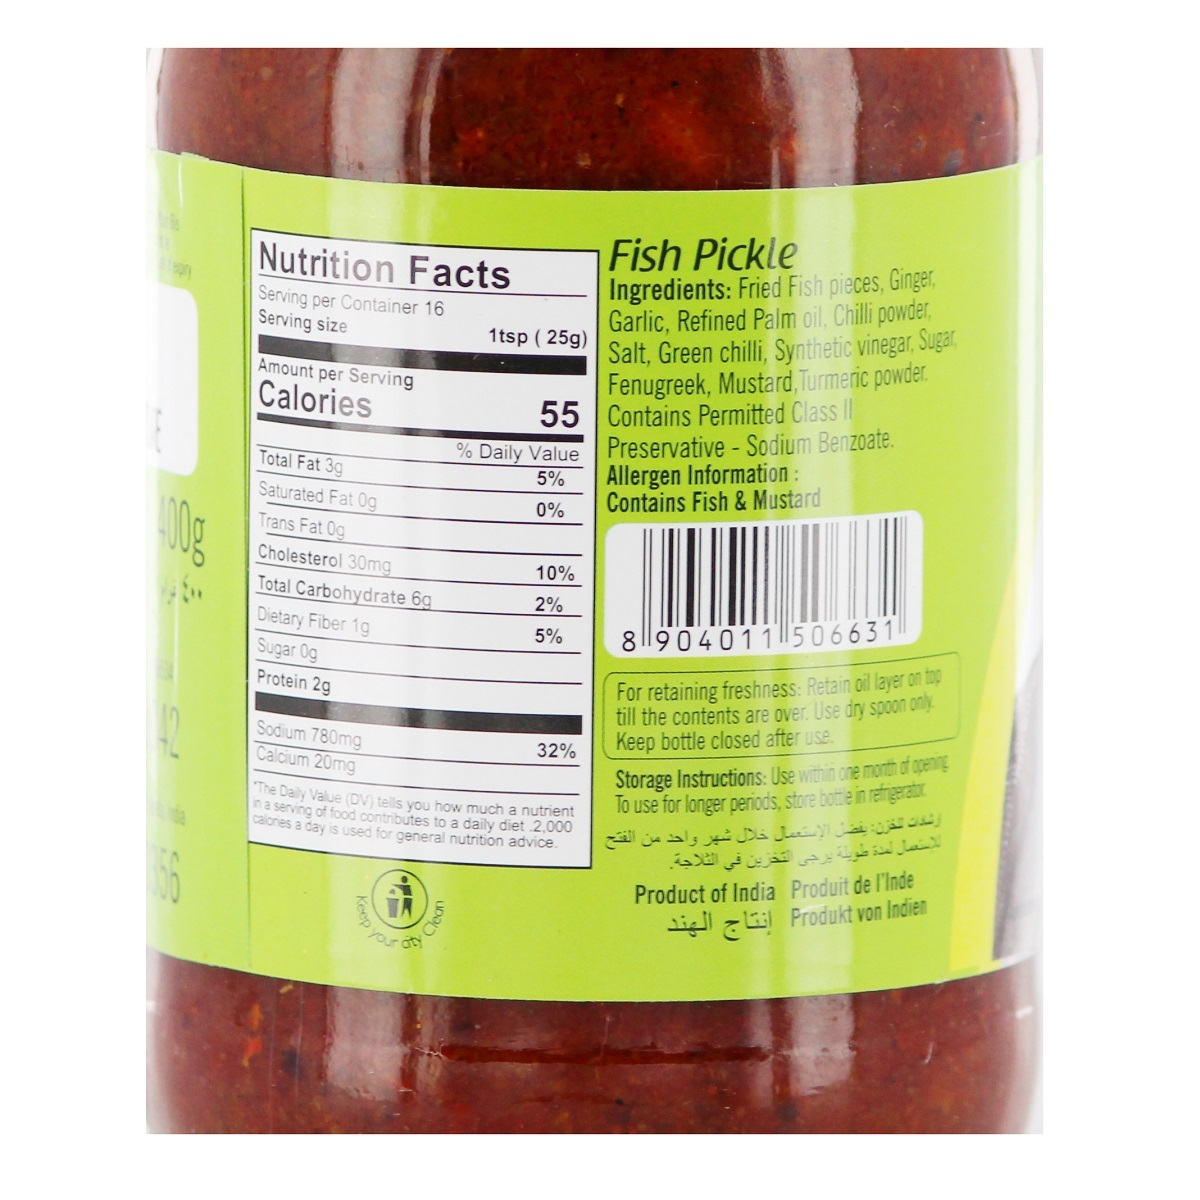 Double Horse Fish Pickle 400g